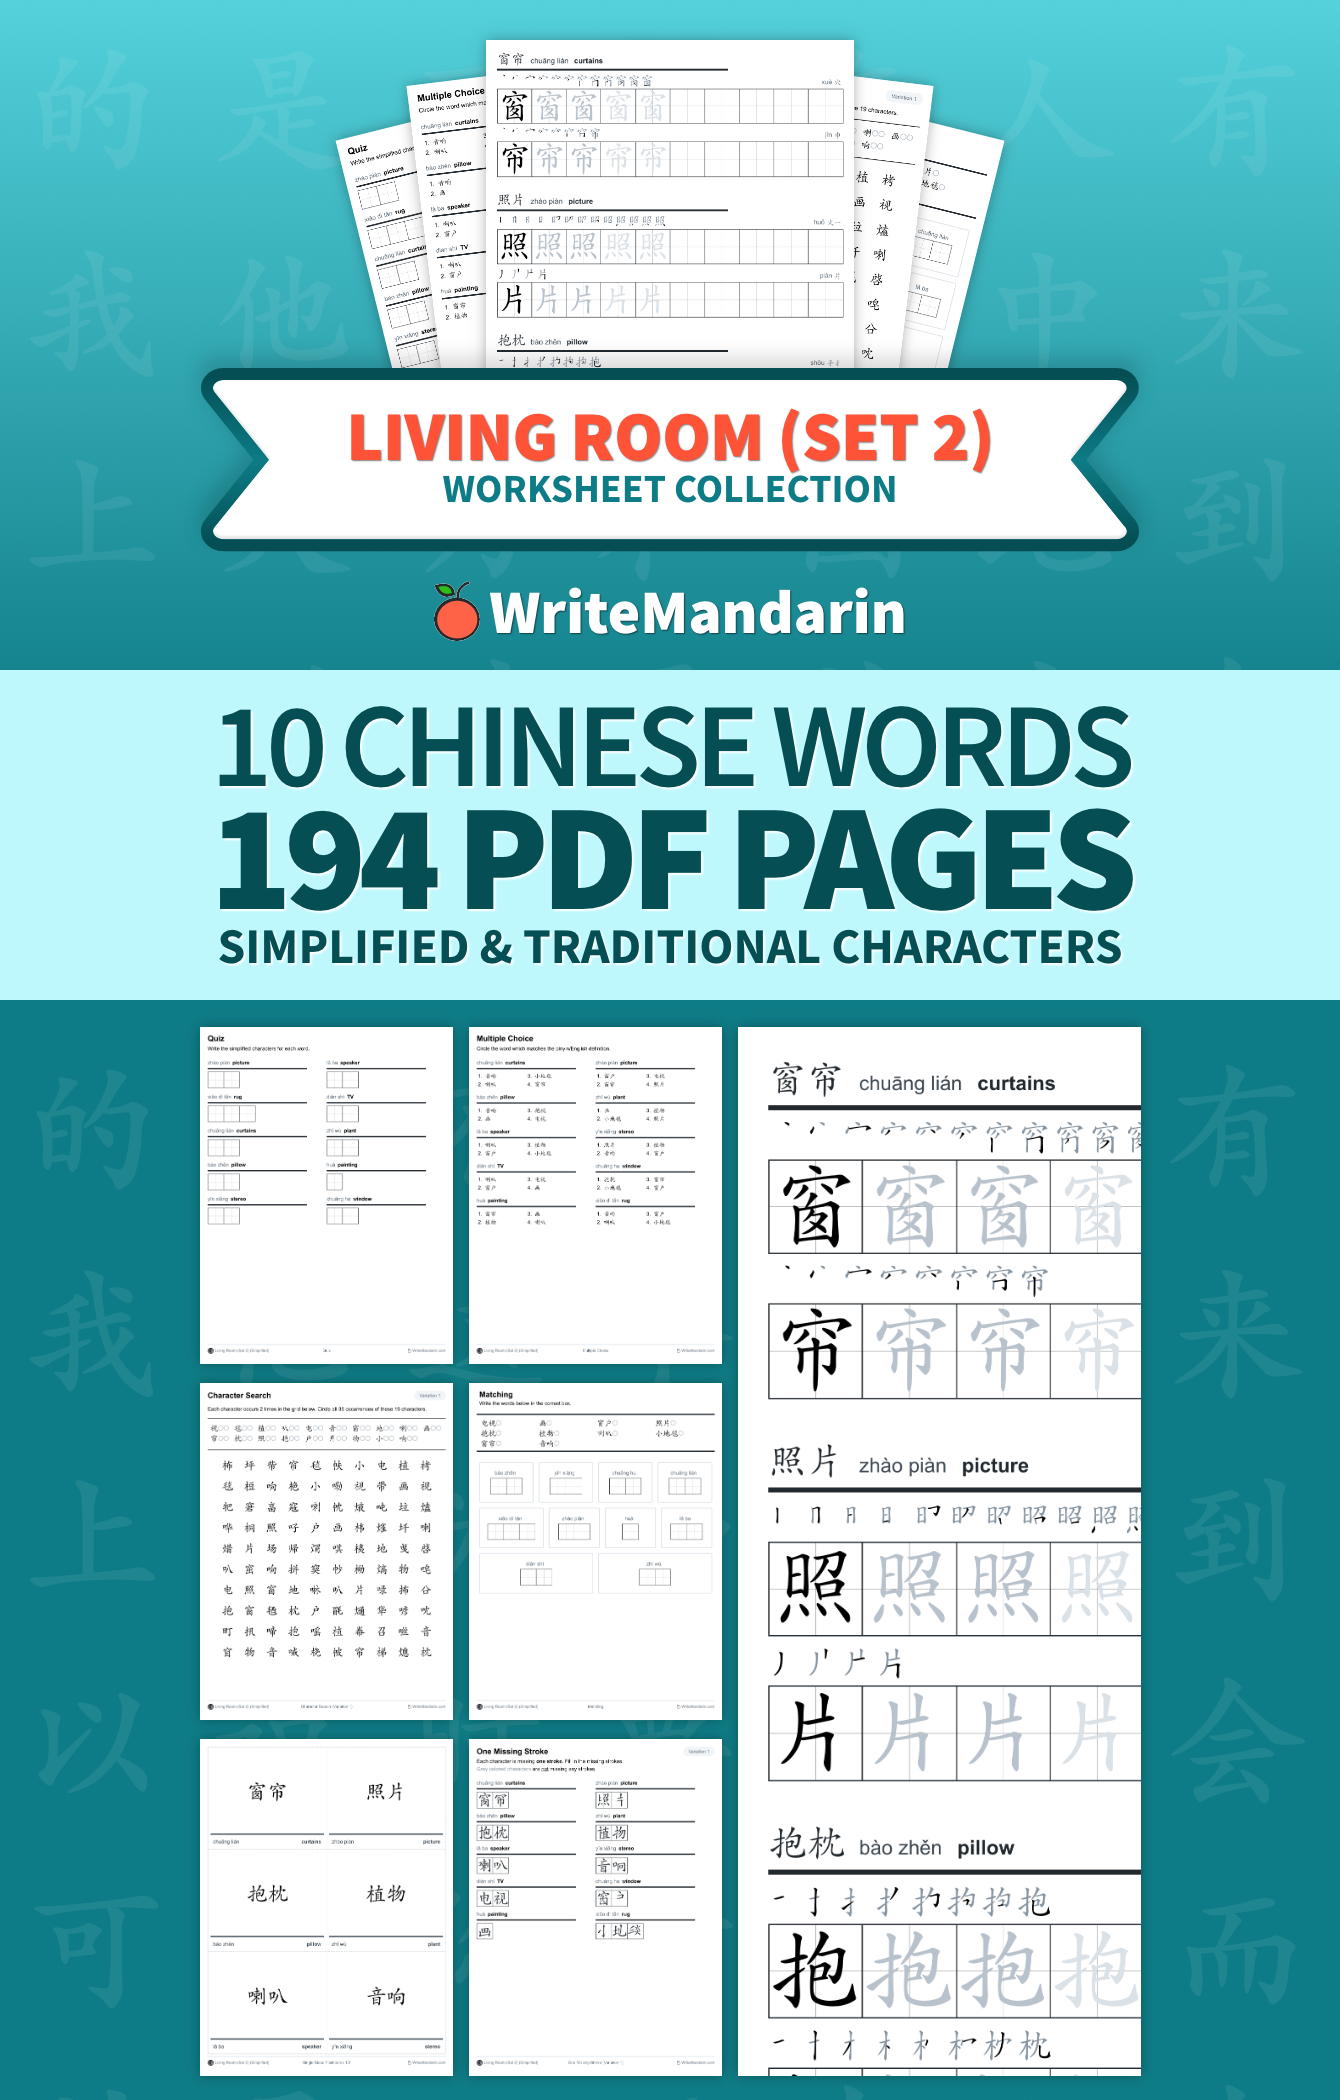 Preview image of Living Room (Set 2) worksheet collection